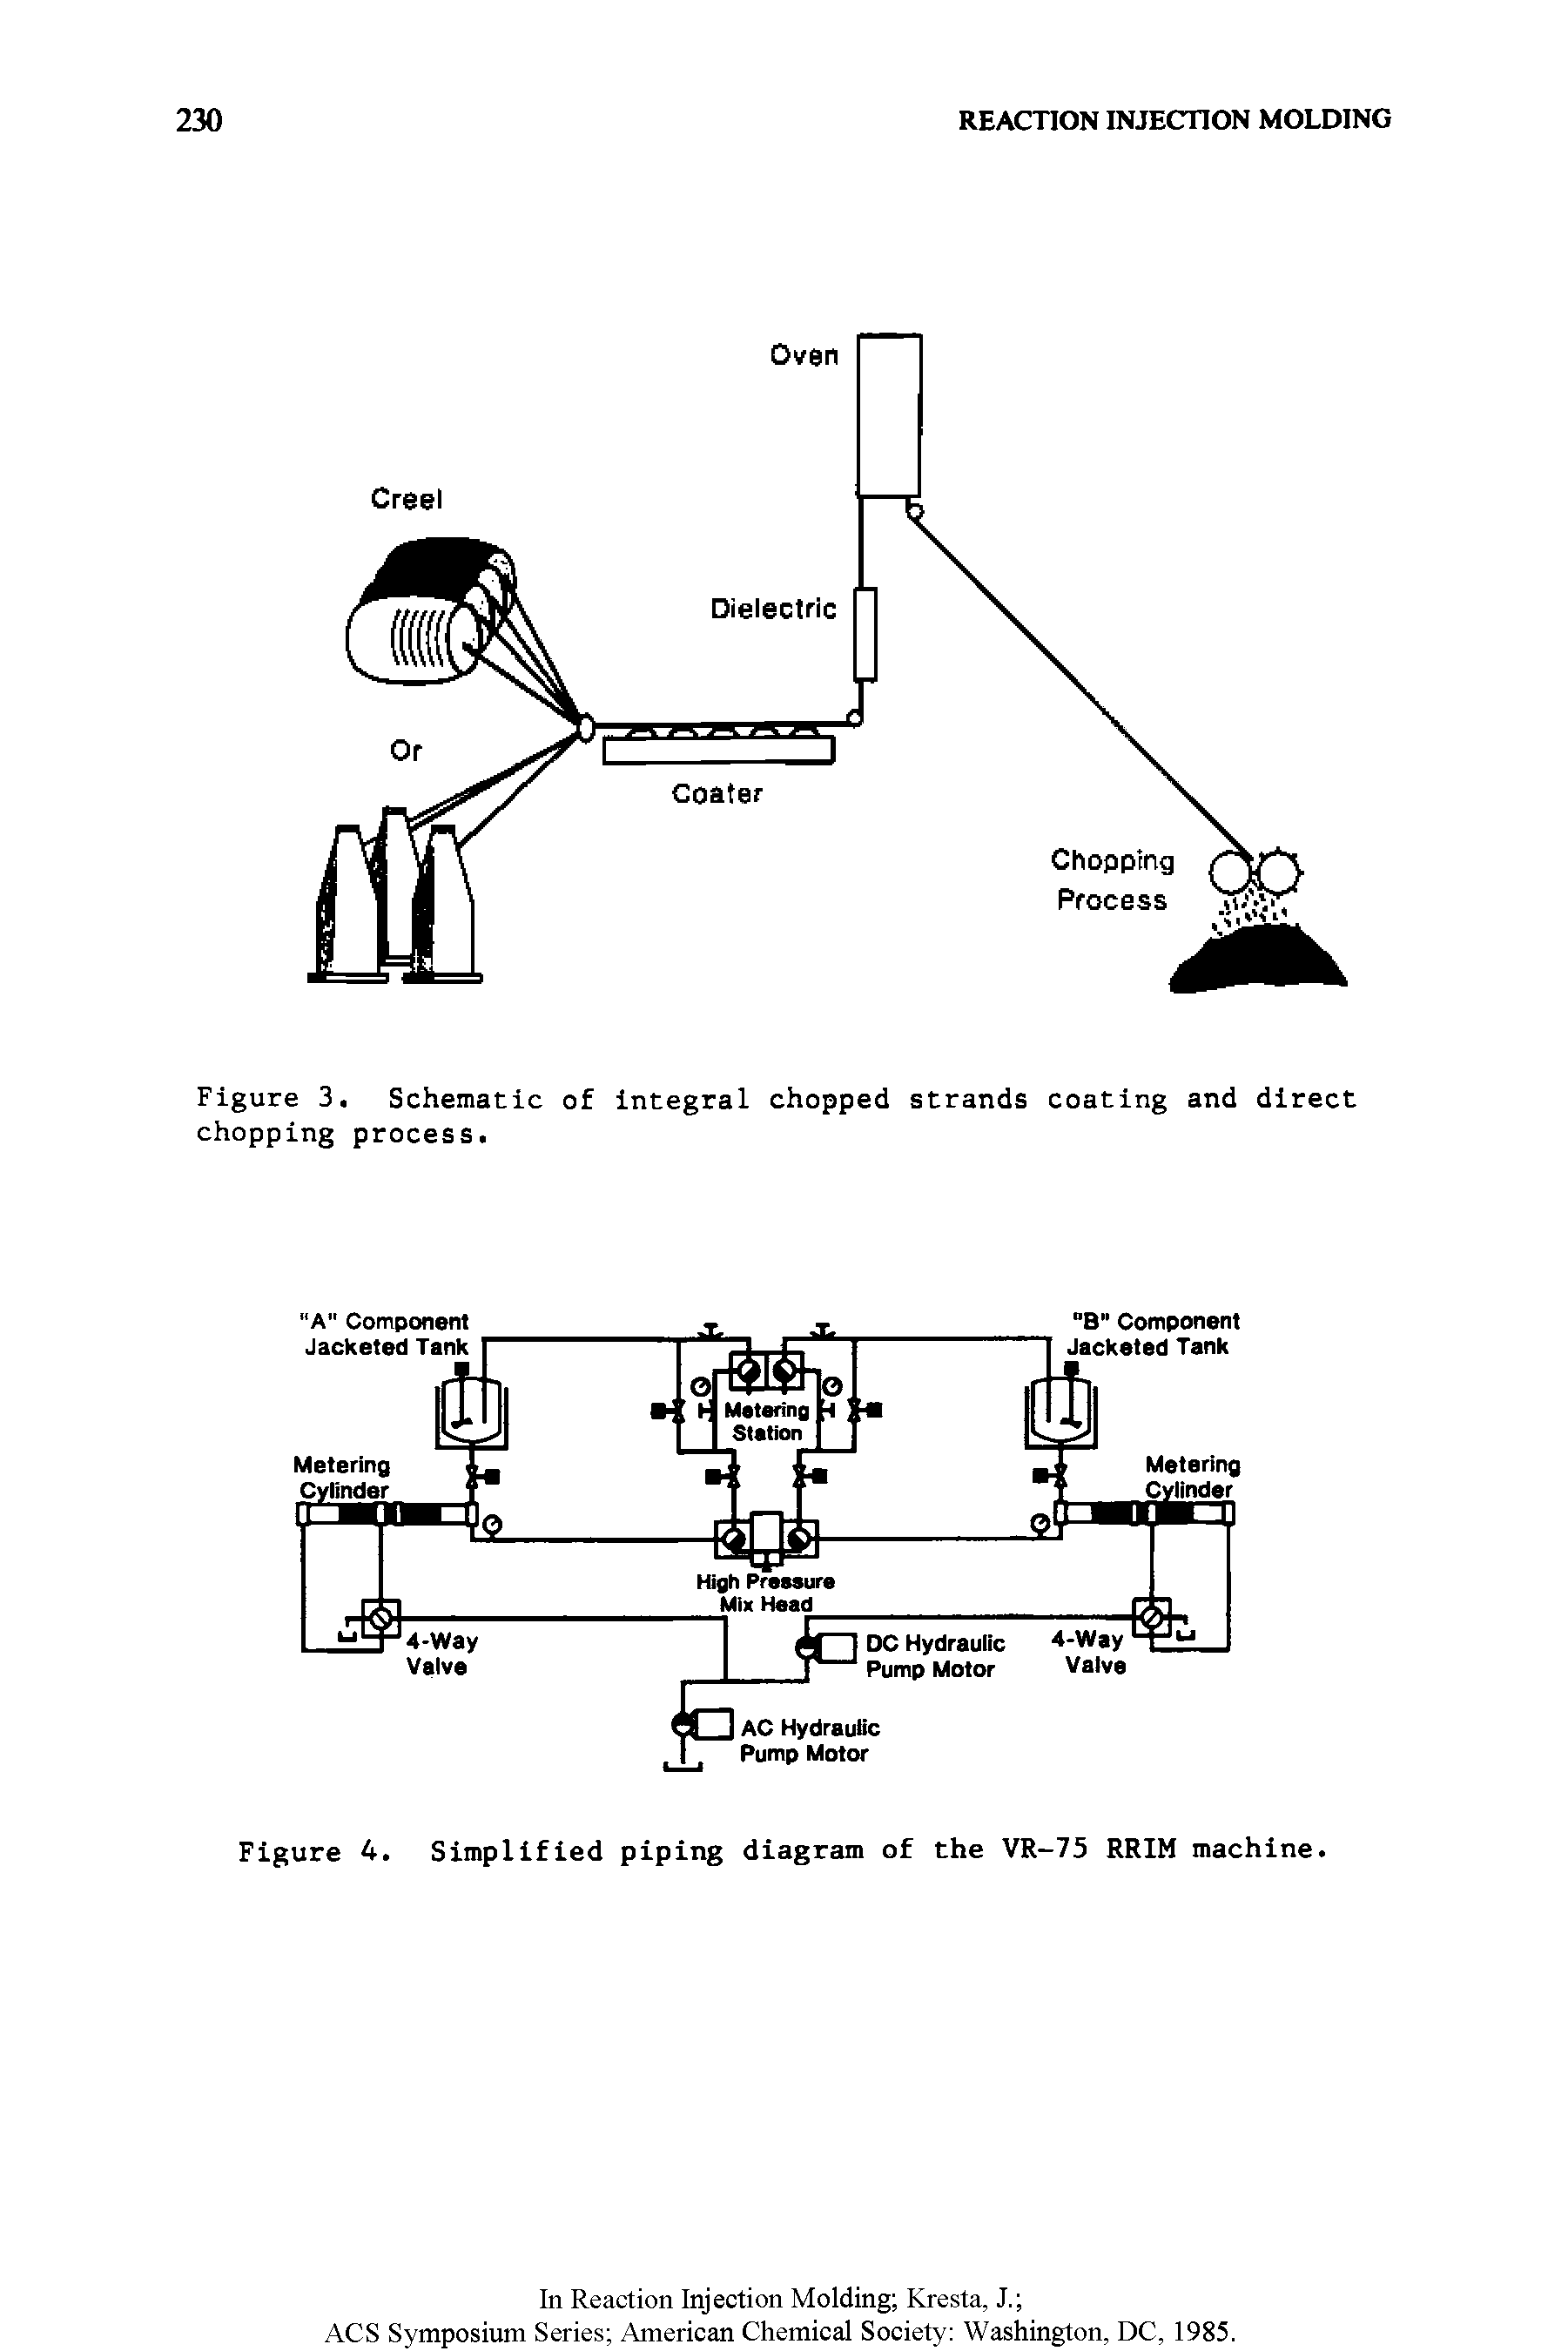 Figure 4. Simplified piping diagram of the VR-75 RRIM machine.